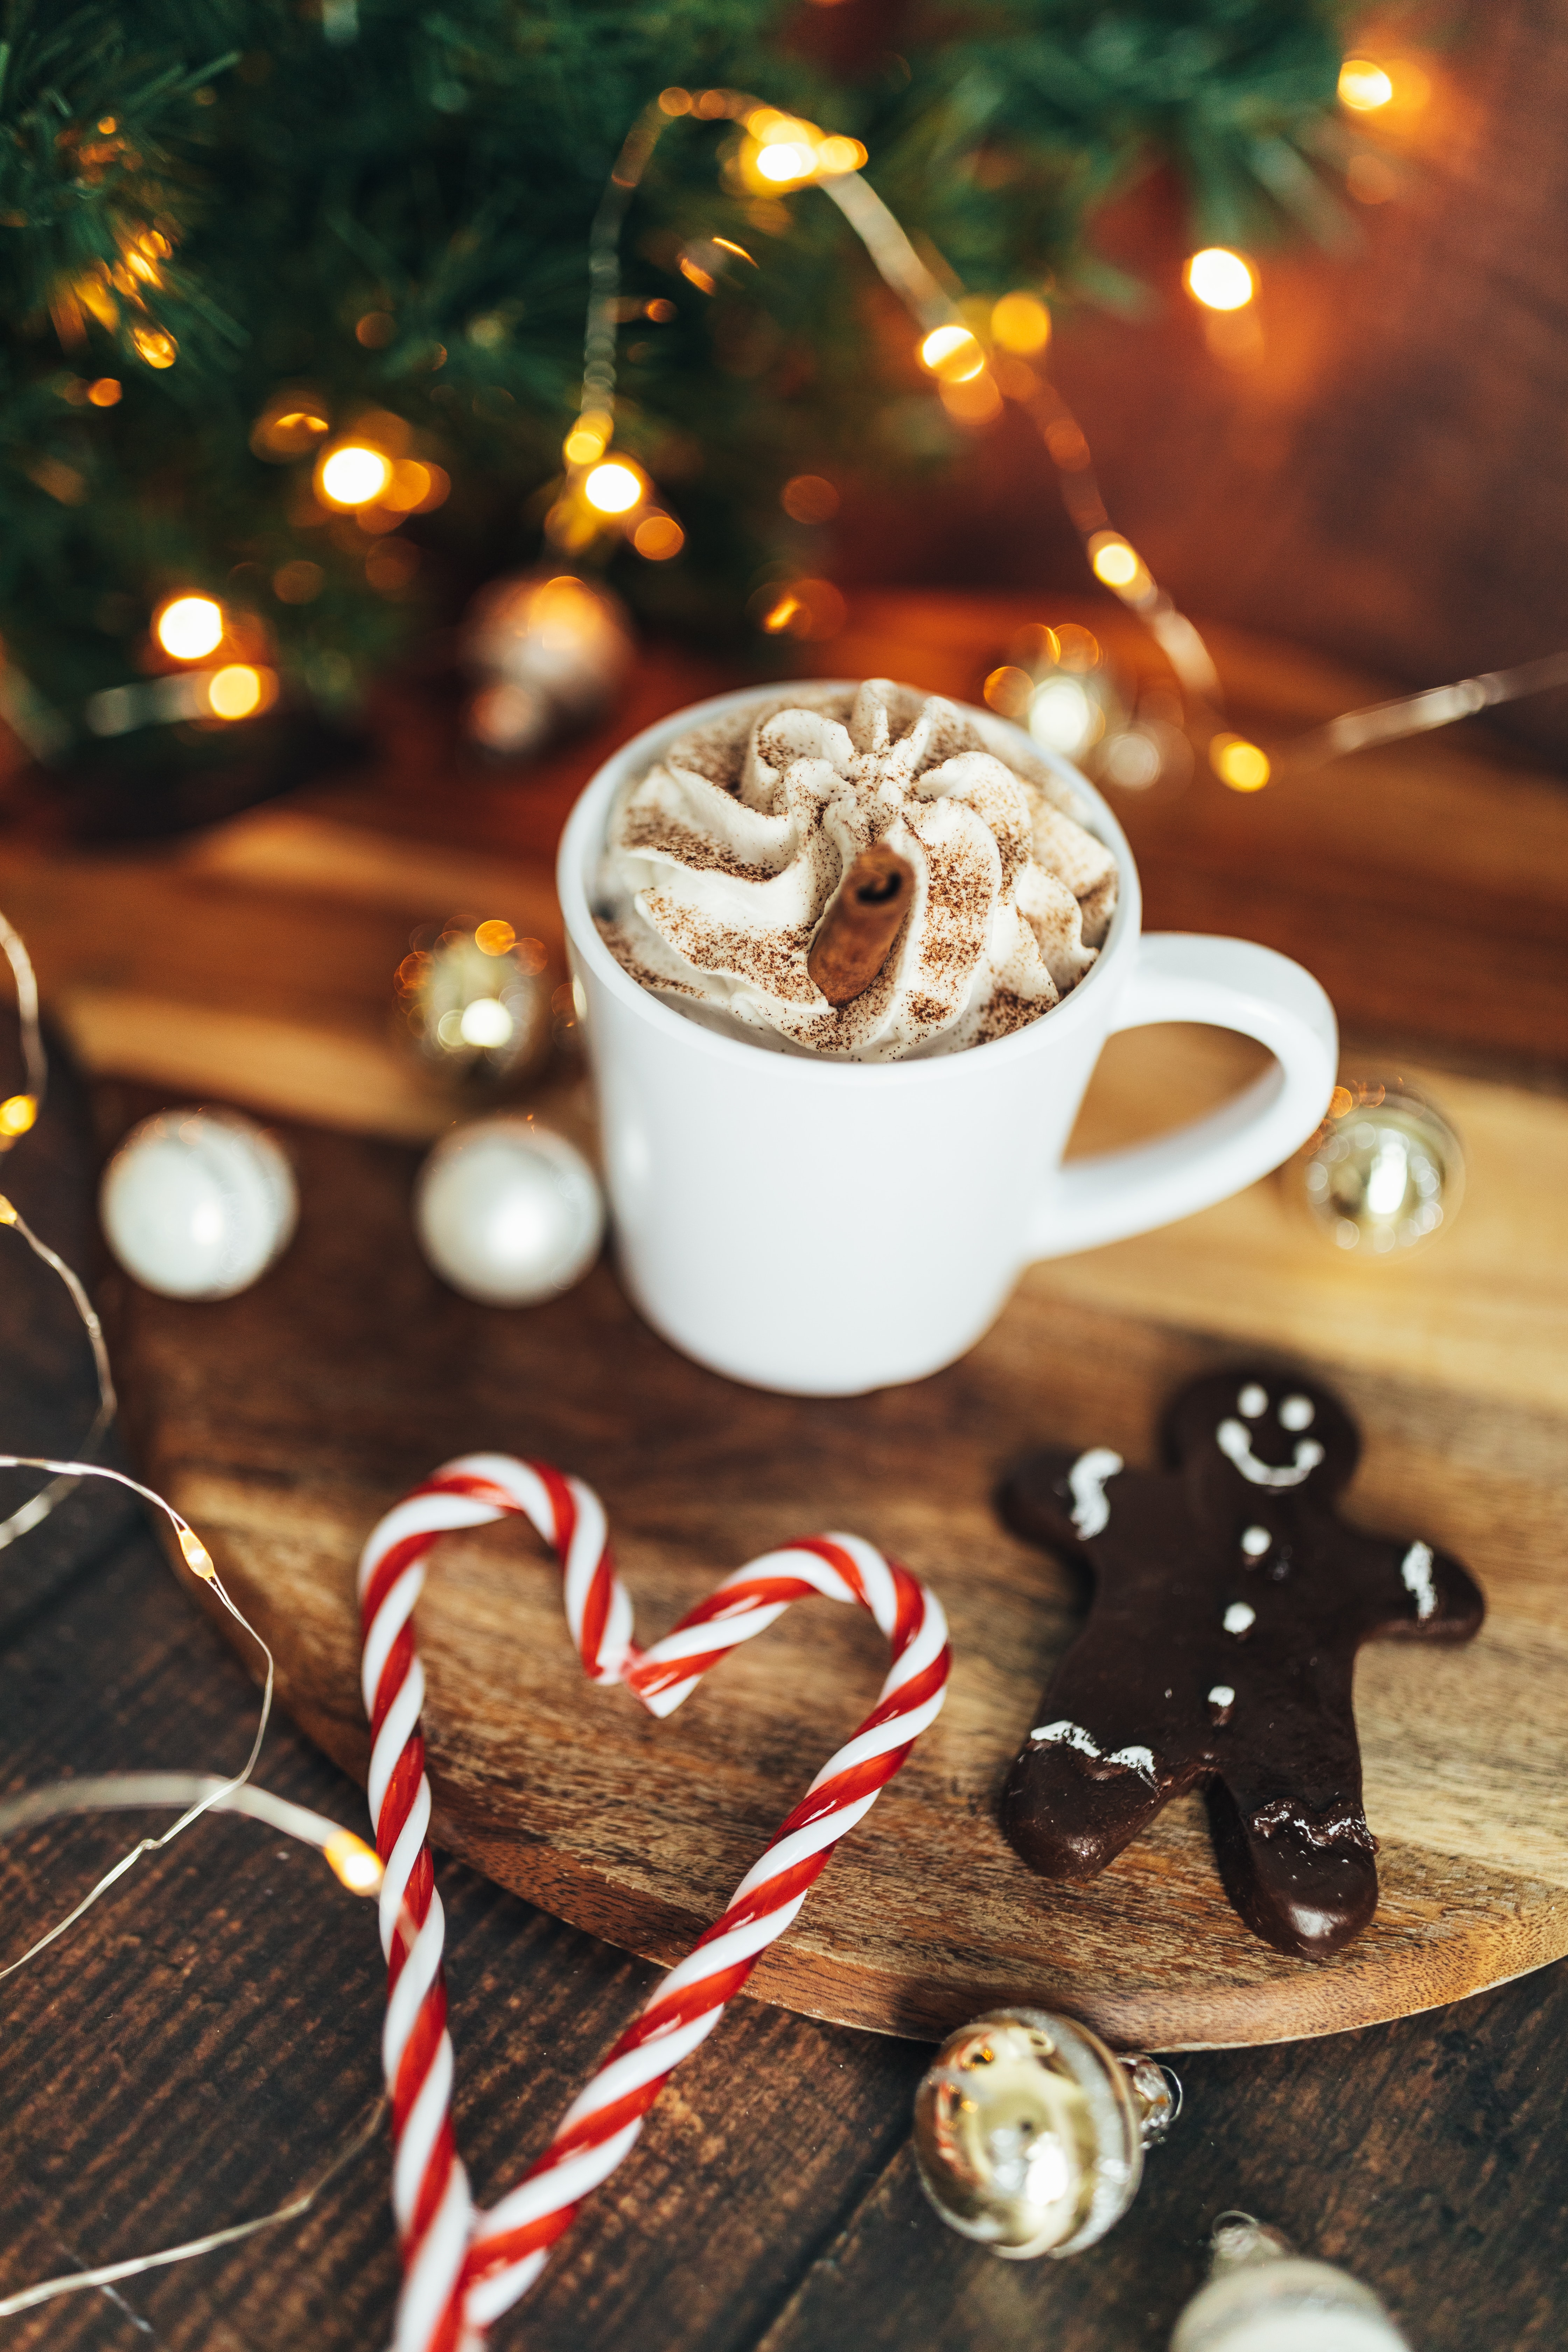 98043 download wallpaper new year, holidays, cup, christmas, drink, beverage, mug, gingerbread, candy sticks, caramel sticks screensavers and pictures for free